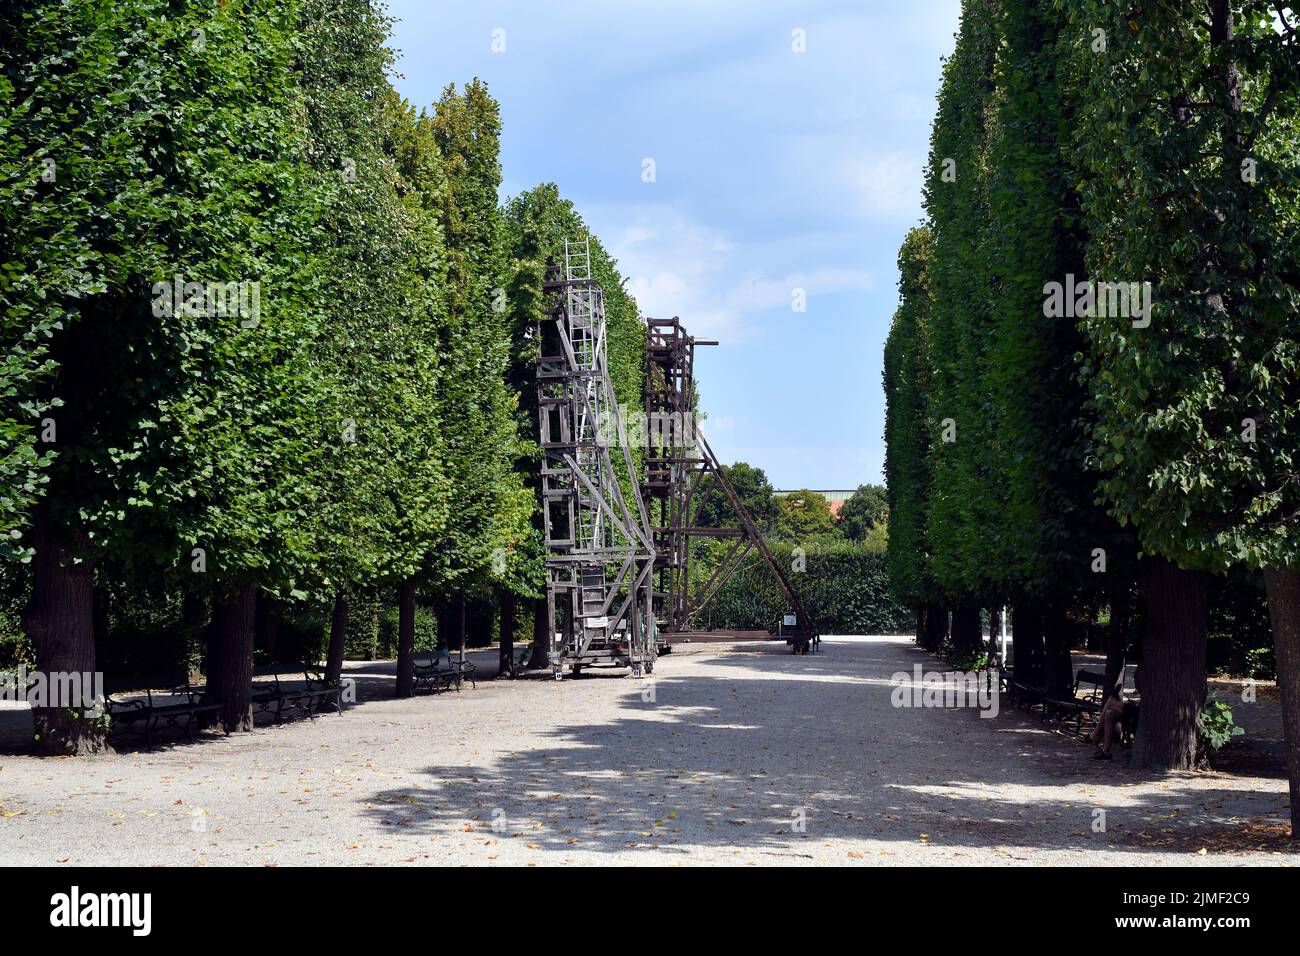 Austria, Vienna, avenue of trees and device for facioning the trees in the park of former residence of the Habsburg rulers and today a UNESCO World He Stock Photo